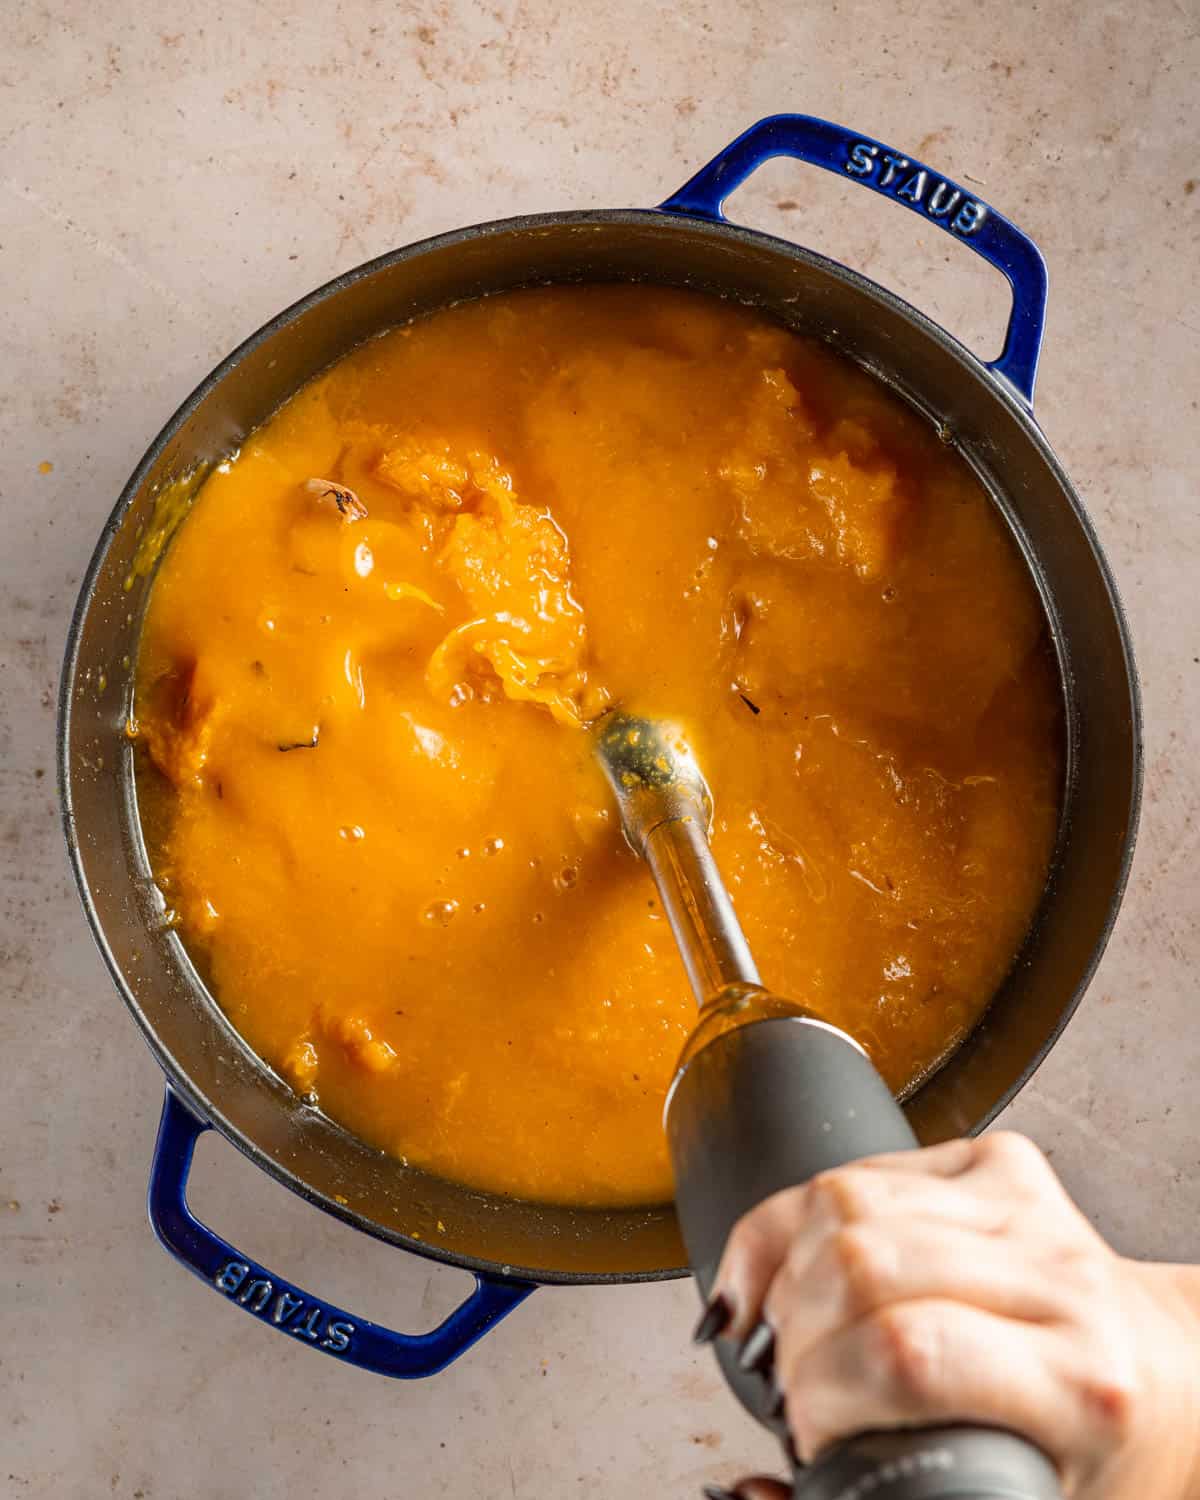 Pureeing butternut squash soup with an immersion blender.